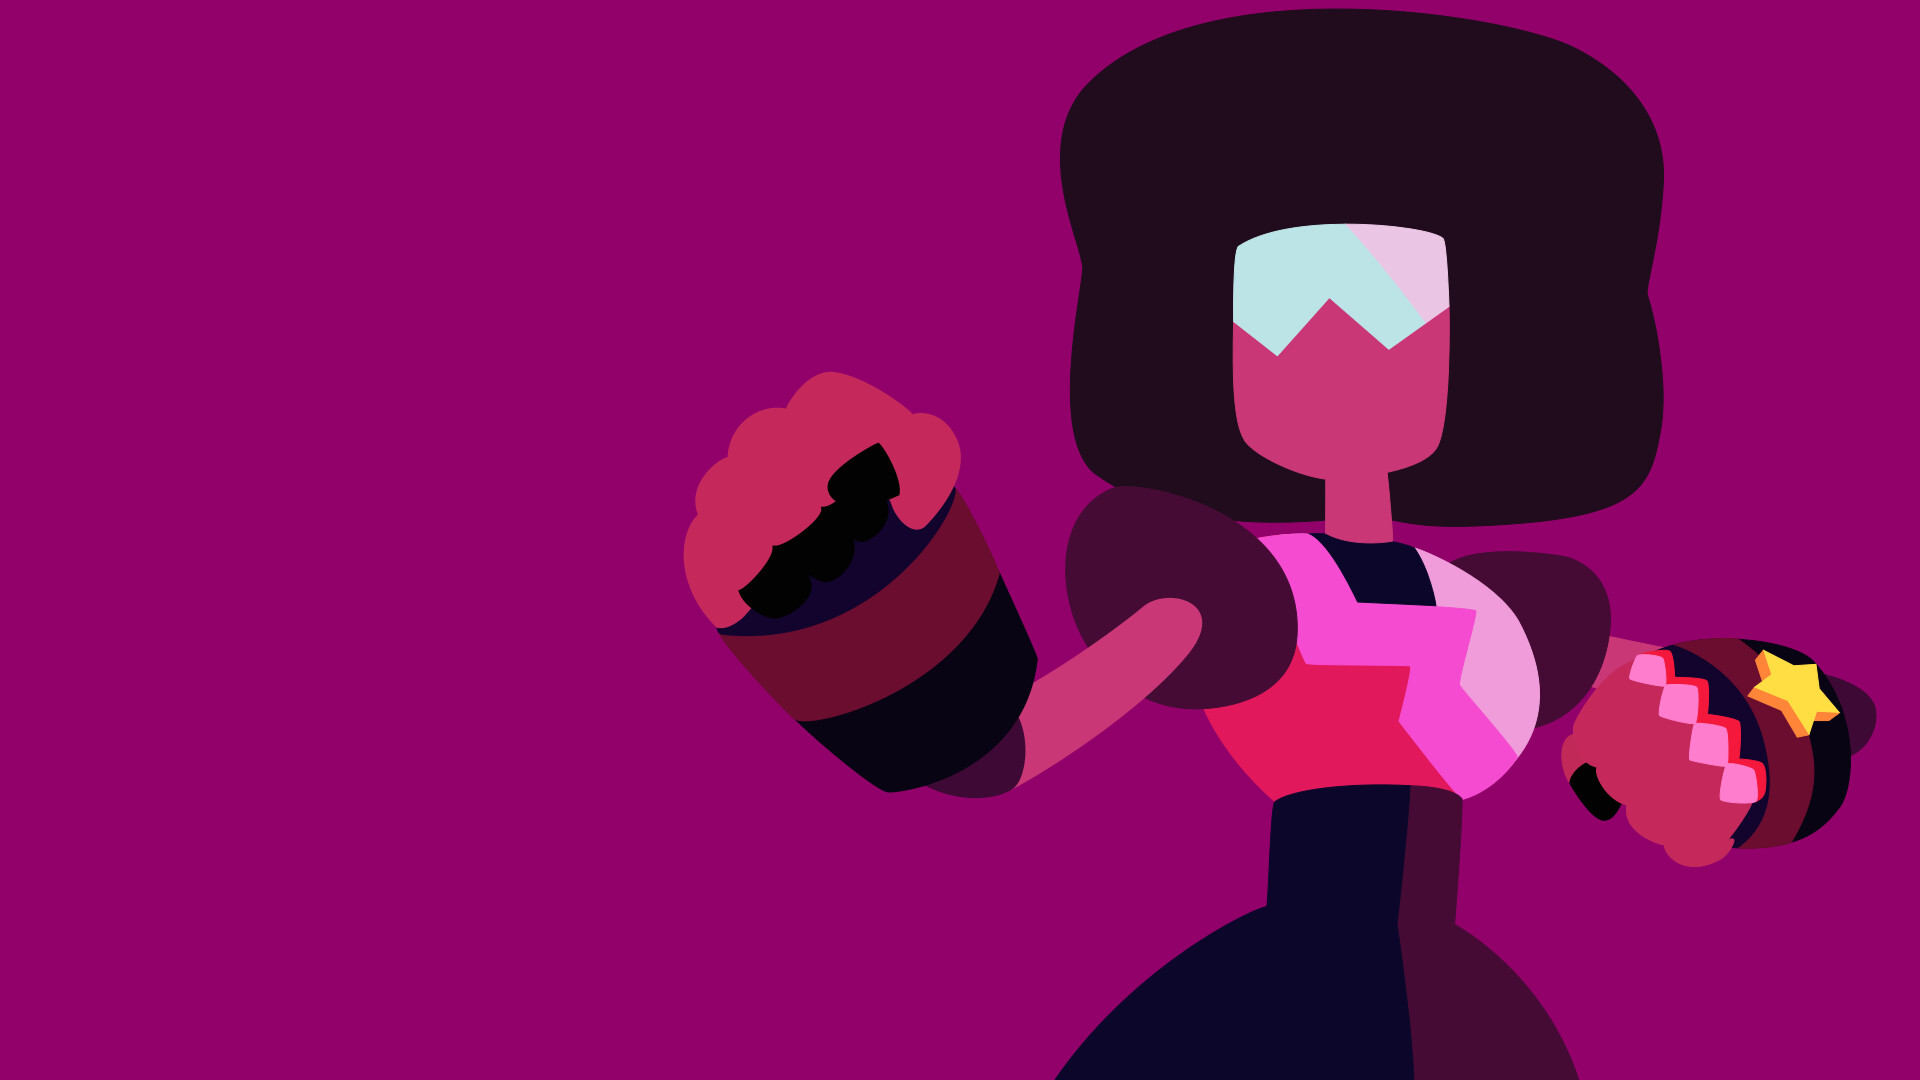 Garnet (Steven Universe): Minimalistic fan art, Magical, mineral-based alien with a holographic body, American animated series. 1920x1080 Full HD Wallpaper.